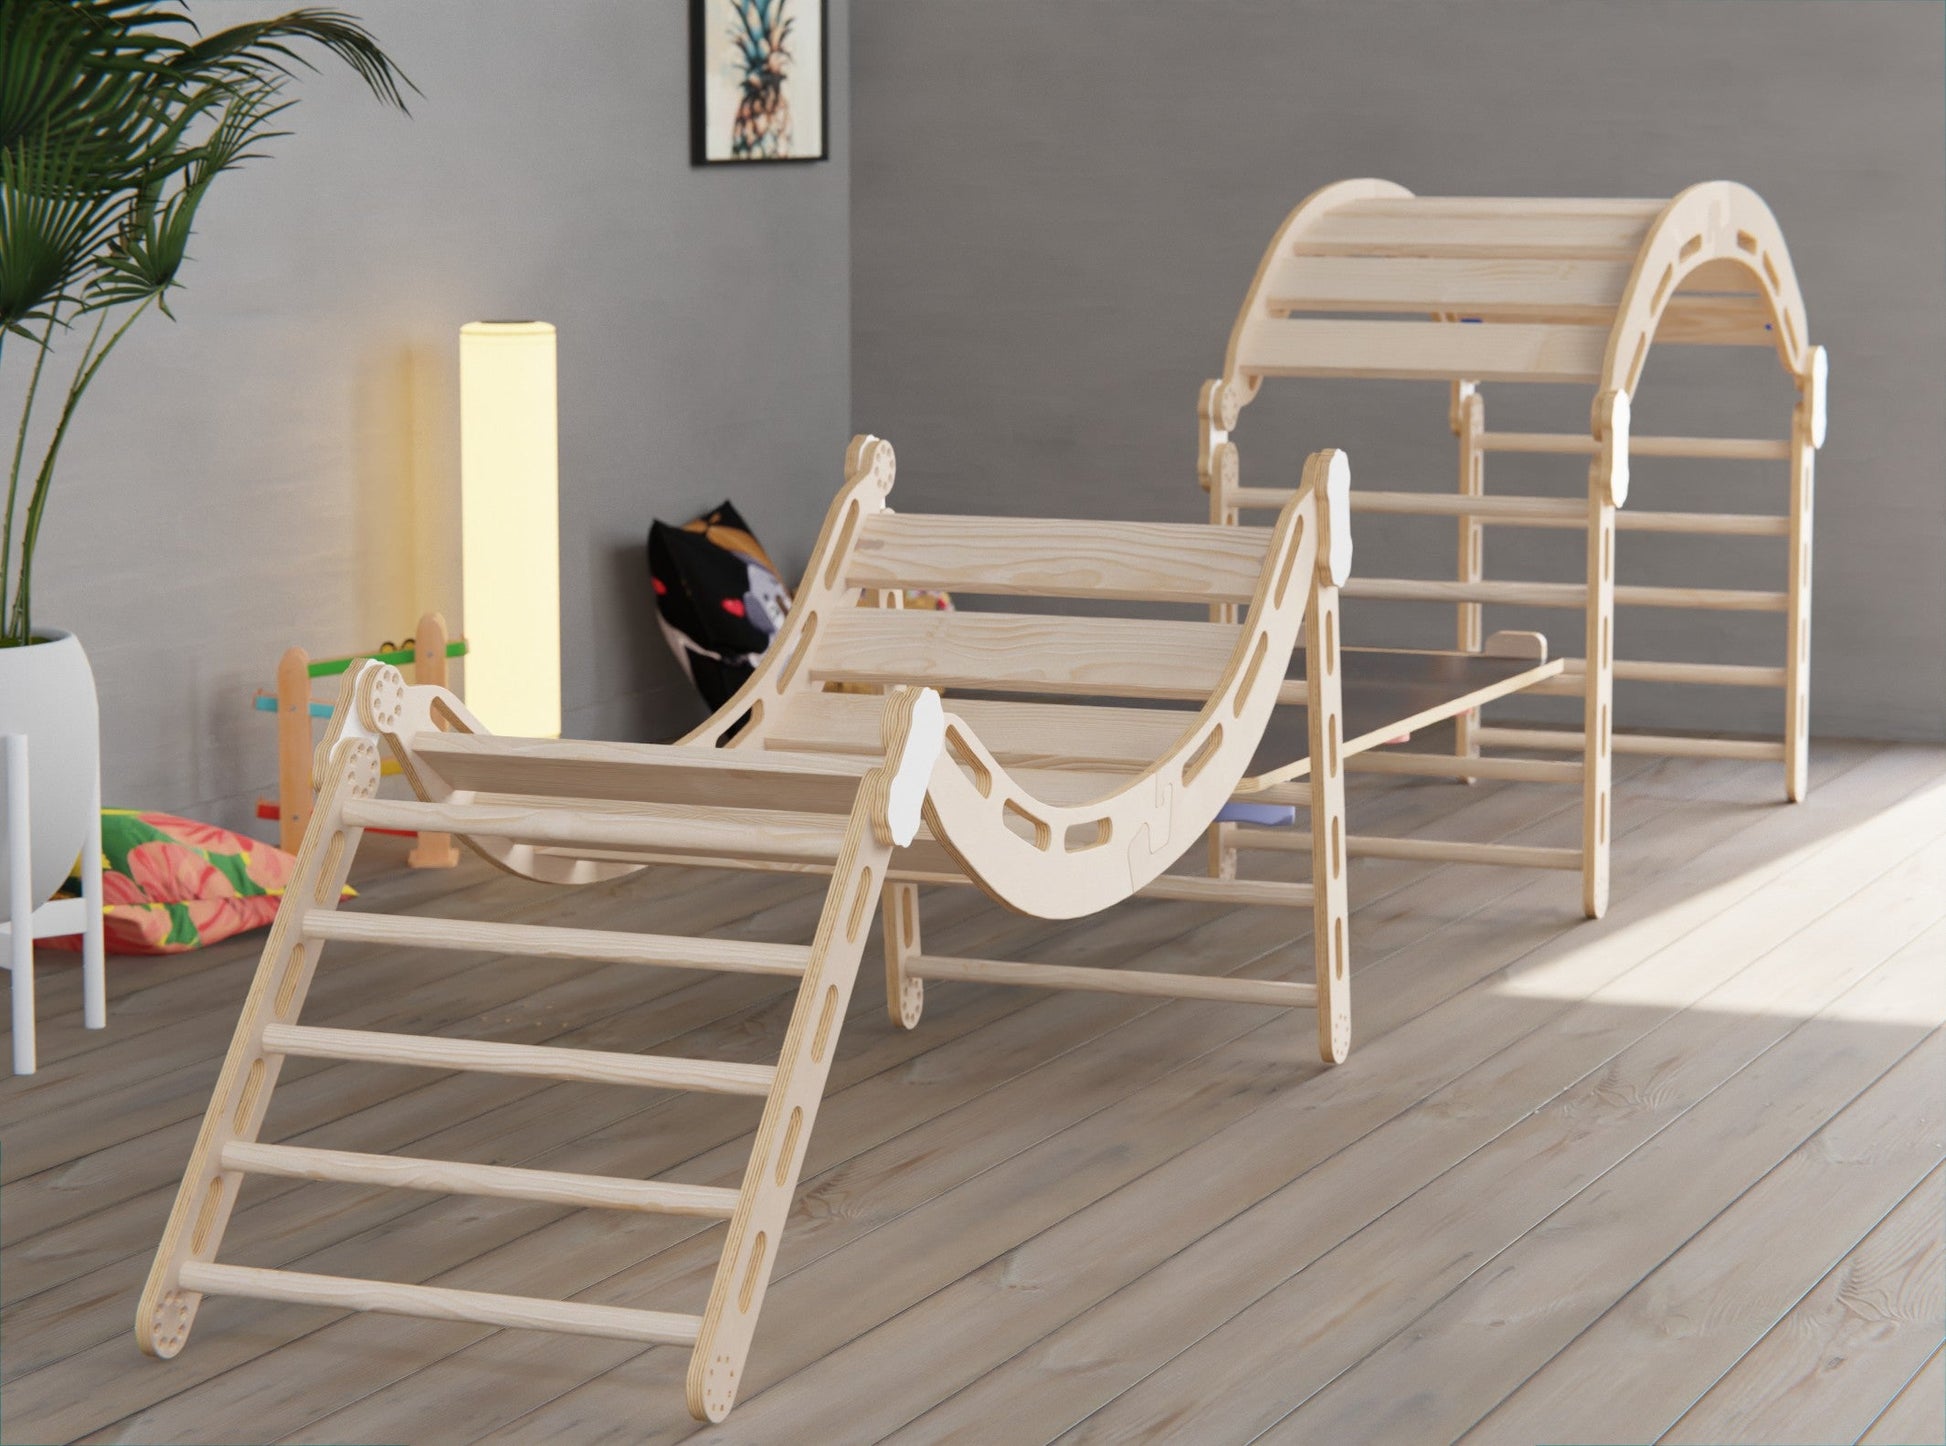 Explore infinite configurations with our Wooden Pikler Triangle & Arch. Enhance coordination, strength, and confidence.